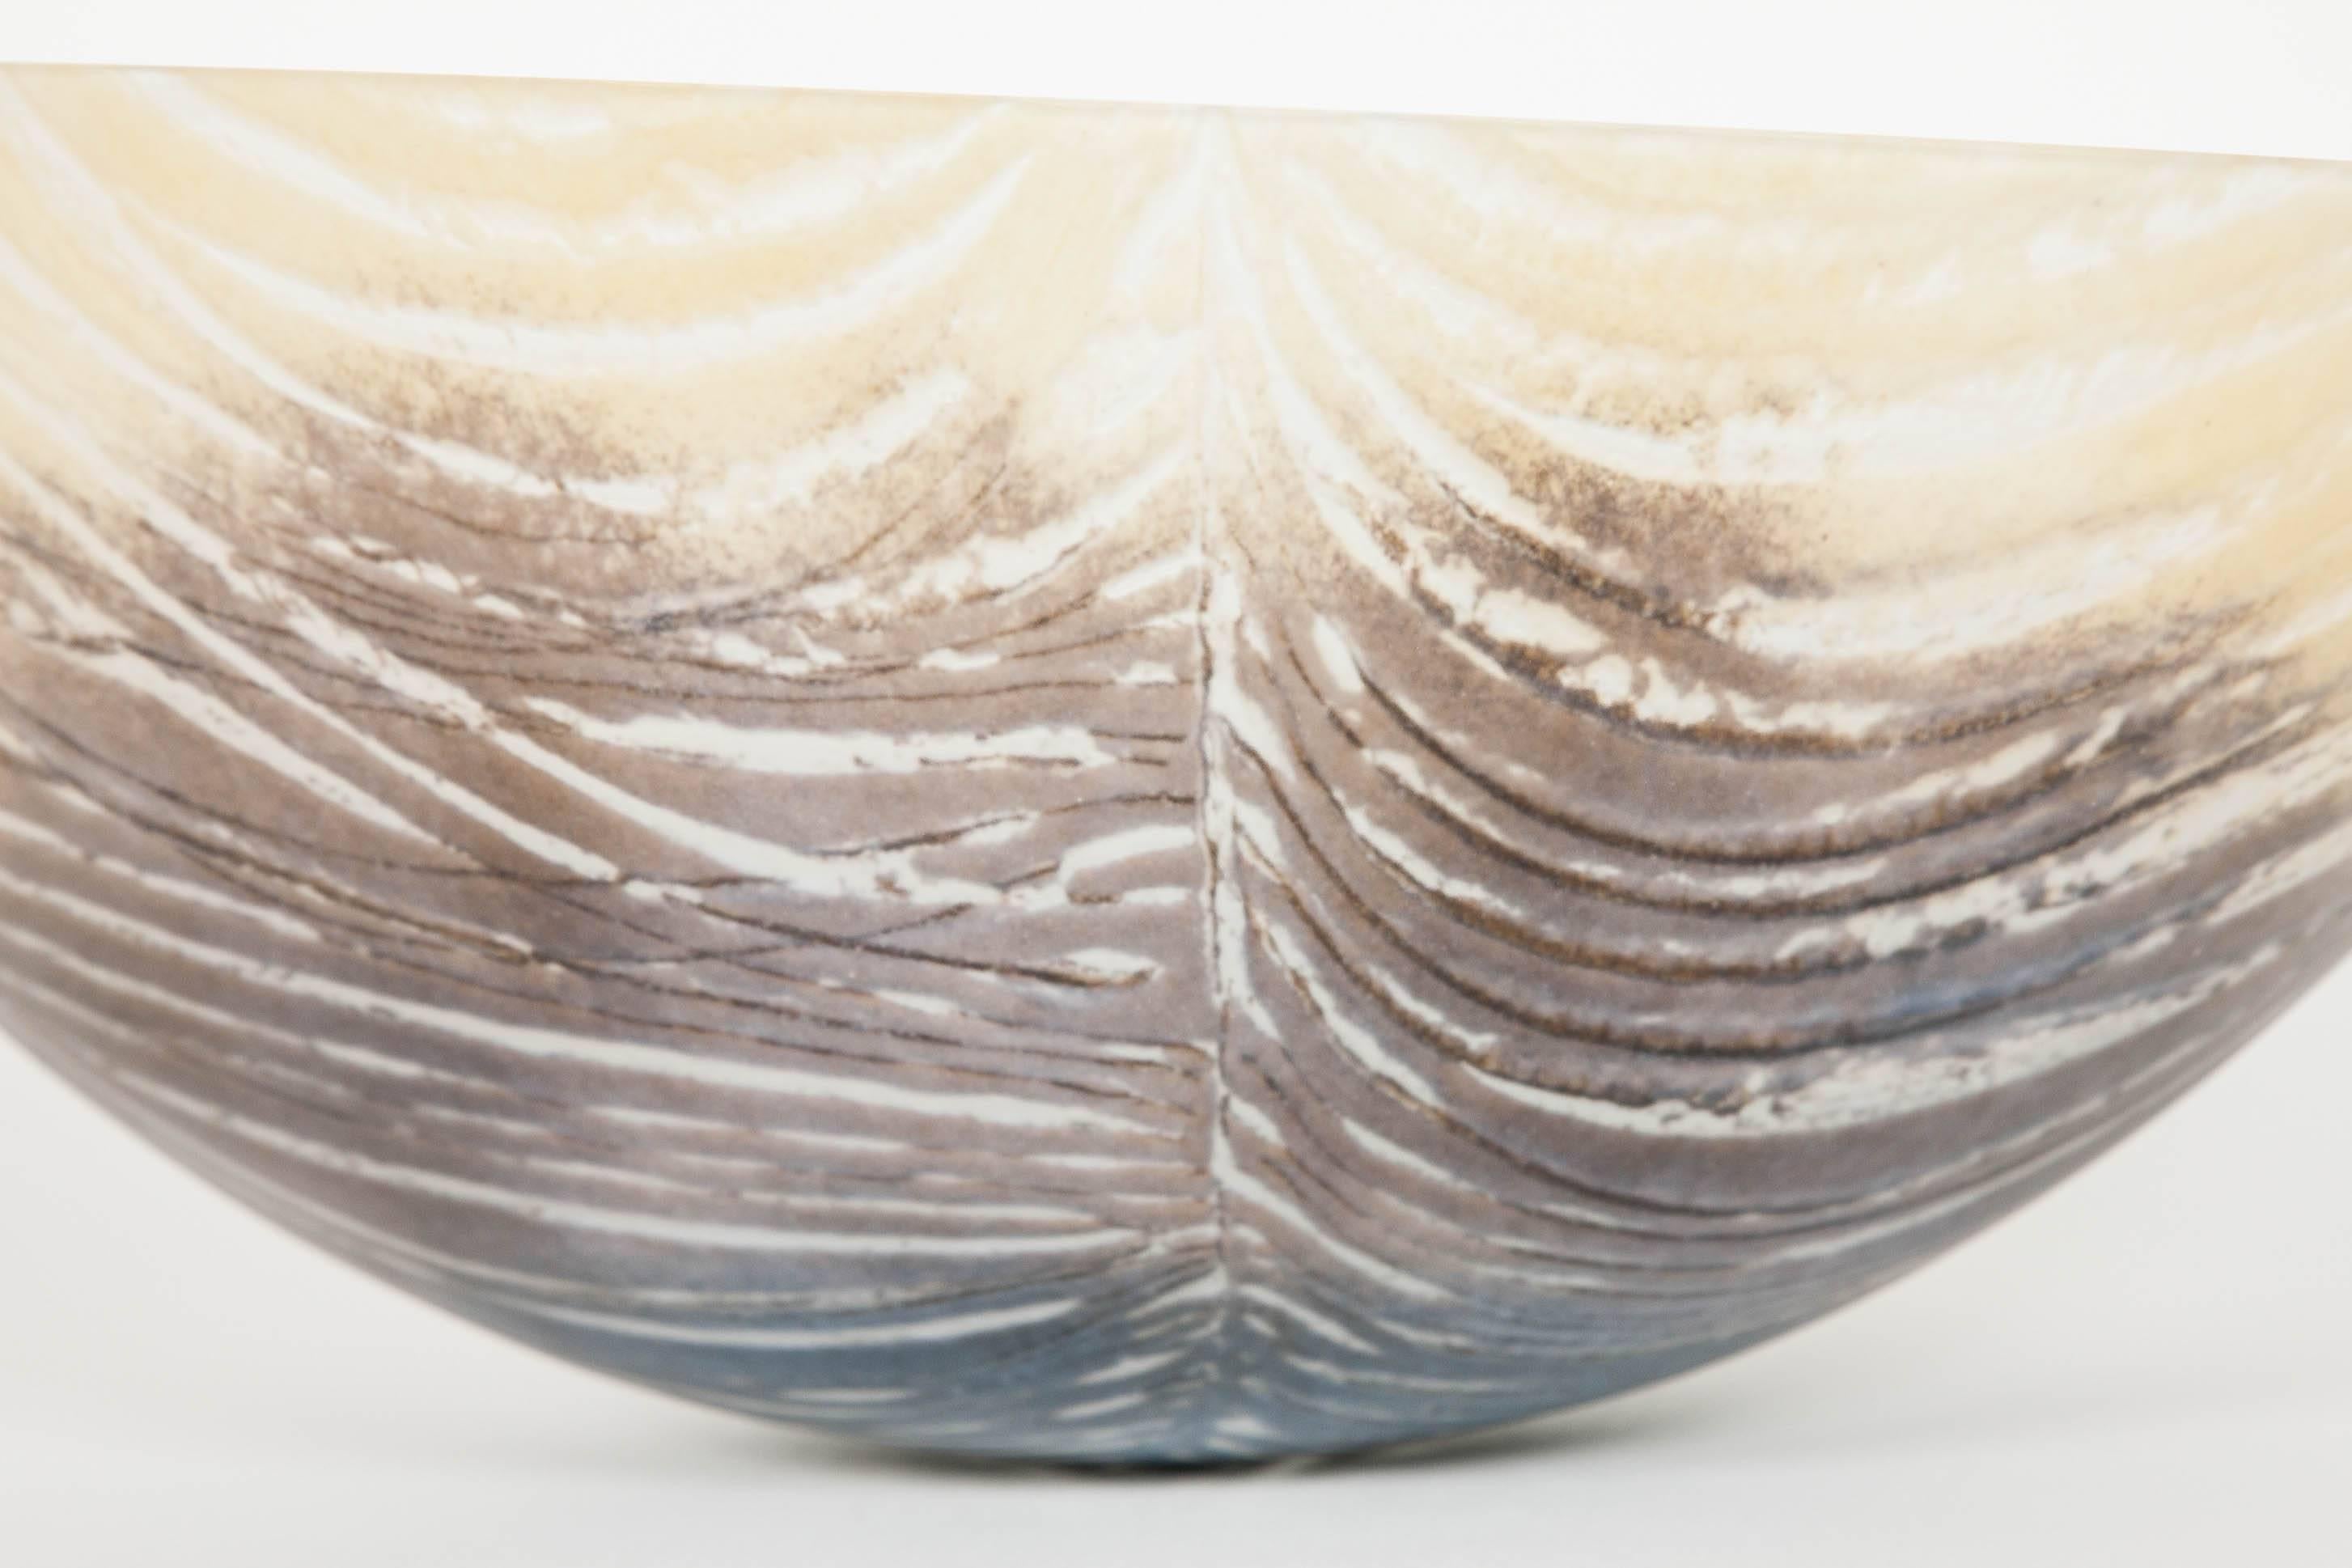 Feather is a unique fused and slumped glass bowl by the British artist Amanda Simmons. Working with the flat sheet glass, Simmons layers powdered colours to create her desired textures, treating the glass more like a canvas to create her imagery.